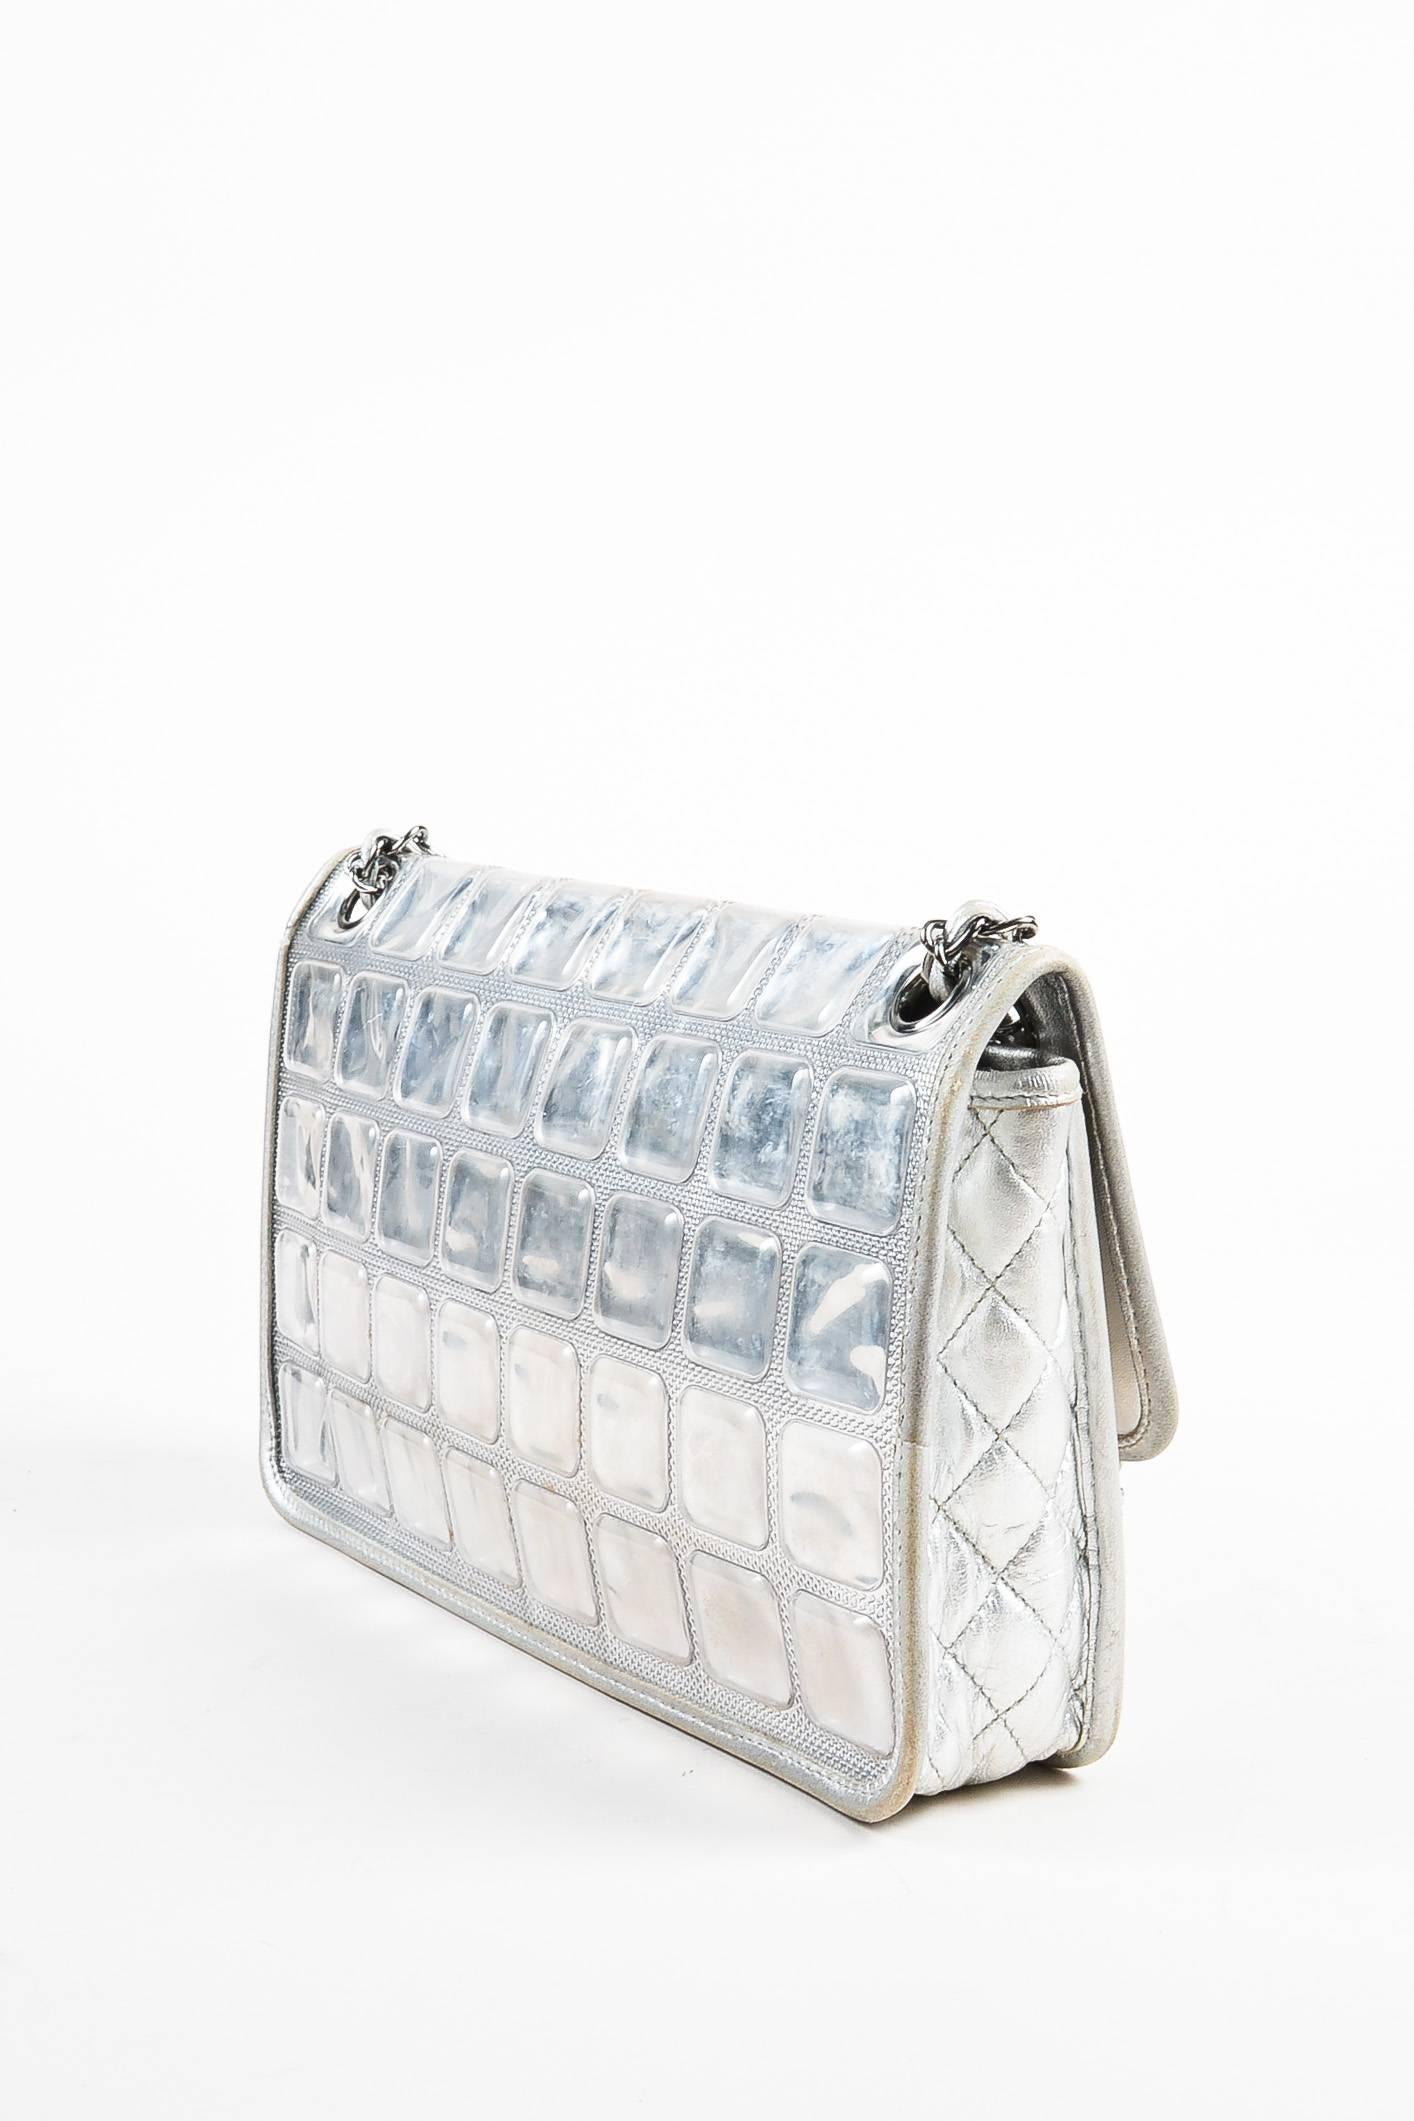 2006/2008-era "Ice Cube" bag. Celebrity favorite as seen on Kim Kardashian. Statement bag for a chic daytime affair or an evening night out. Italian handcrafted construction. Metallic leather with ice cube shaped vinyl coated textile